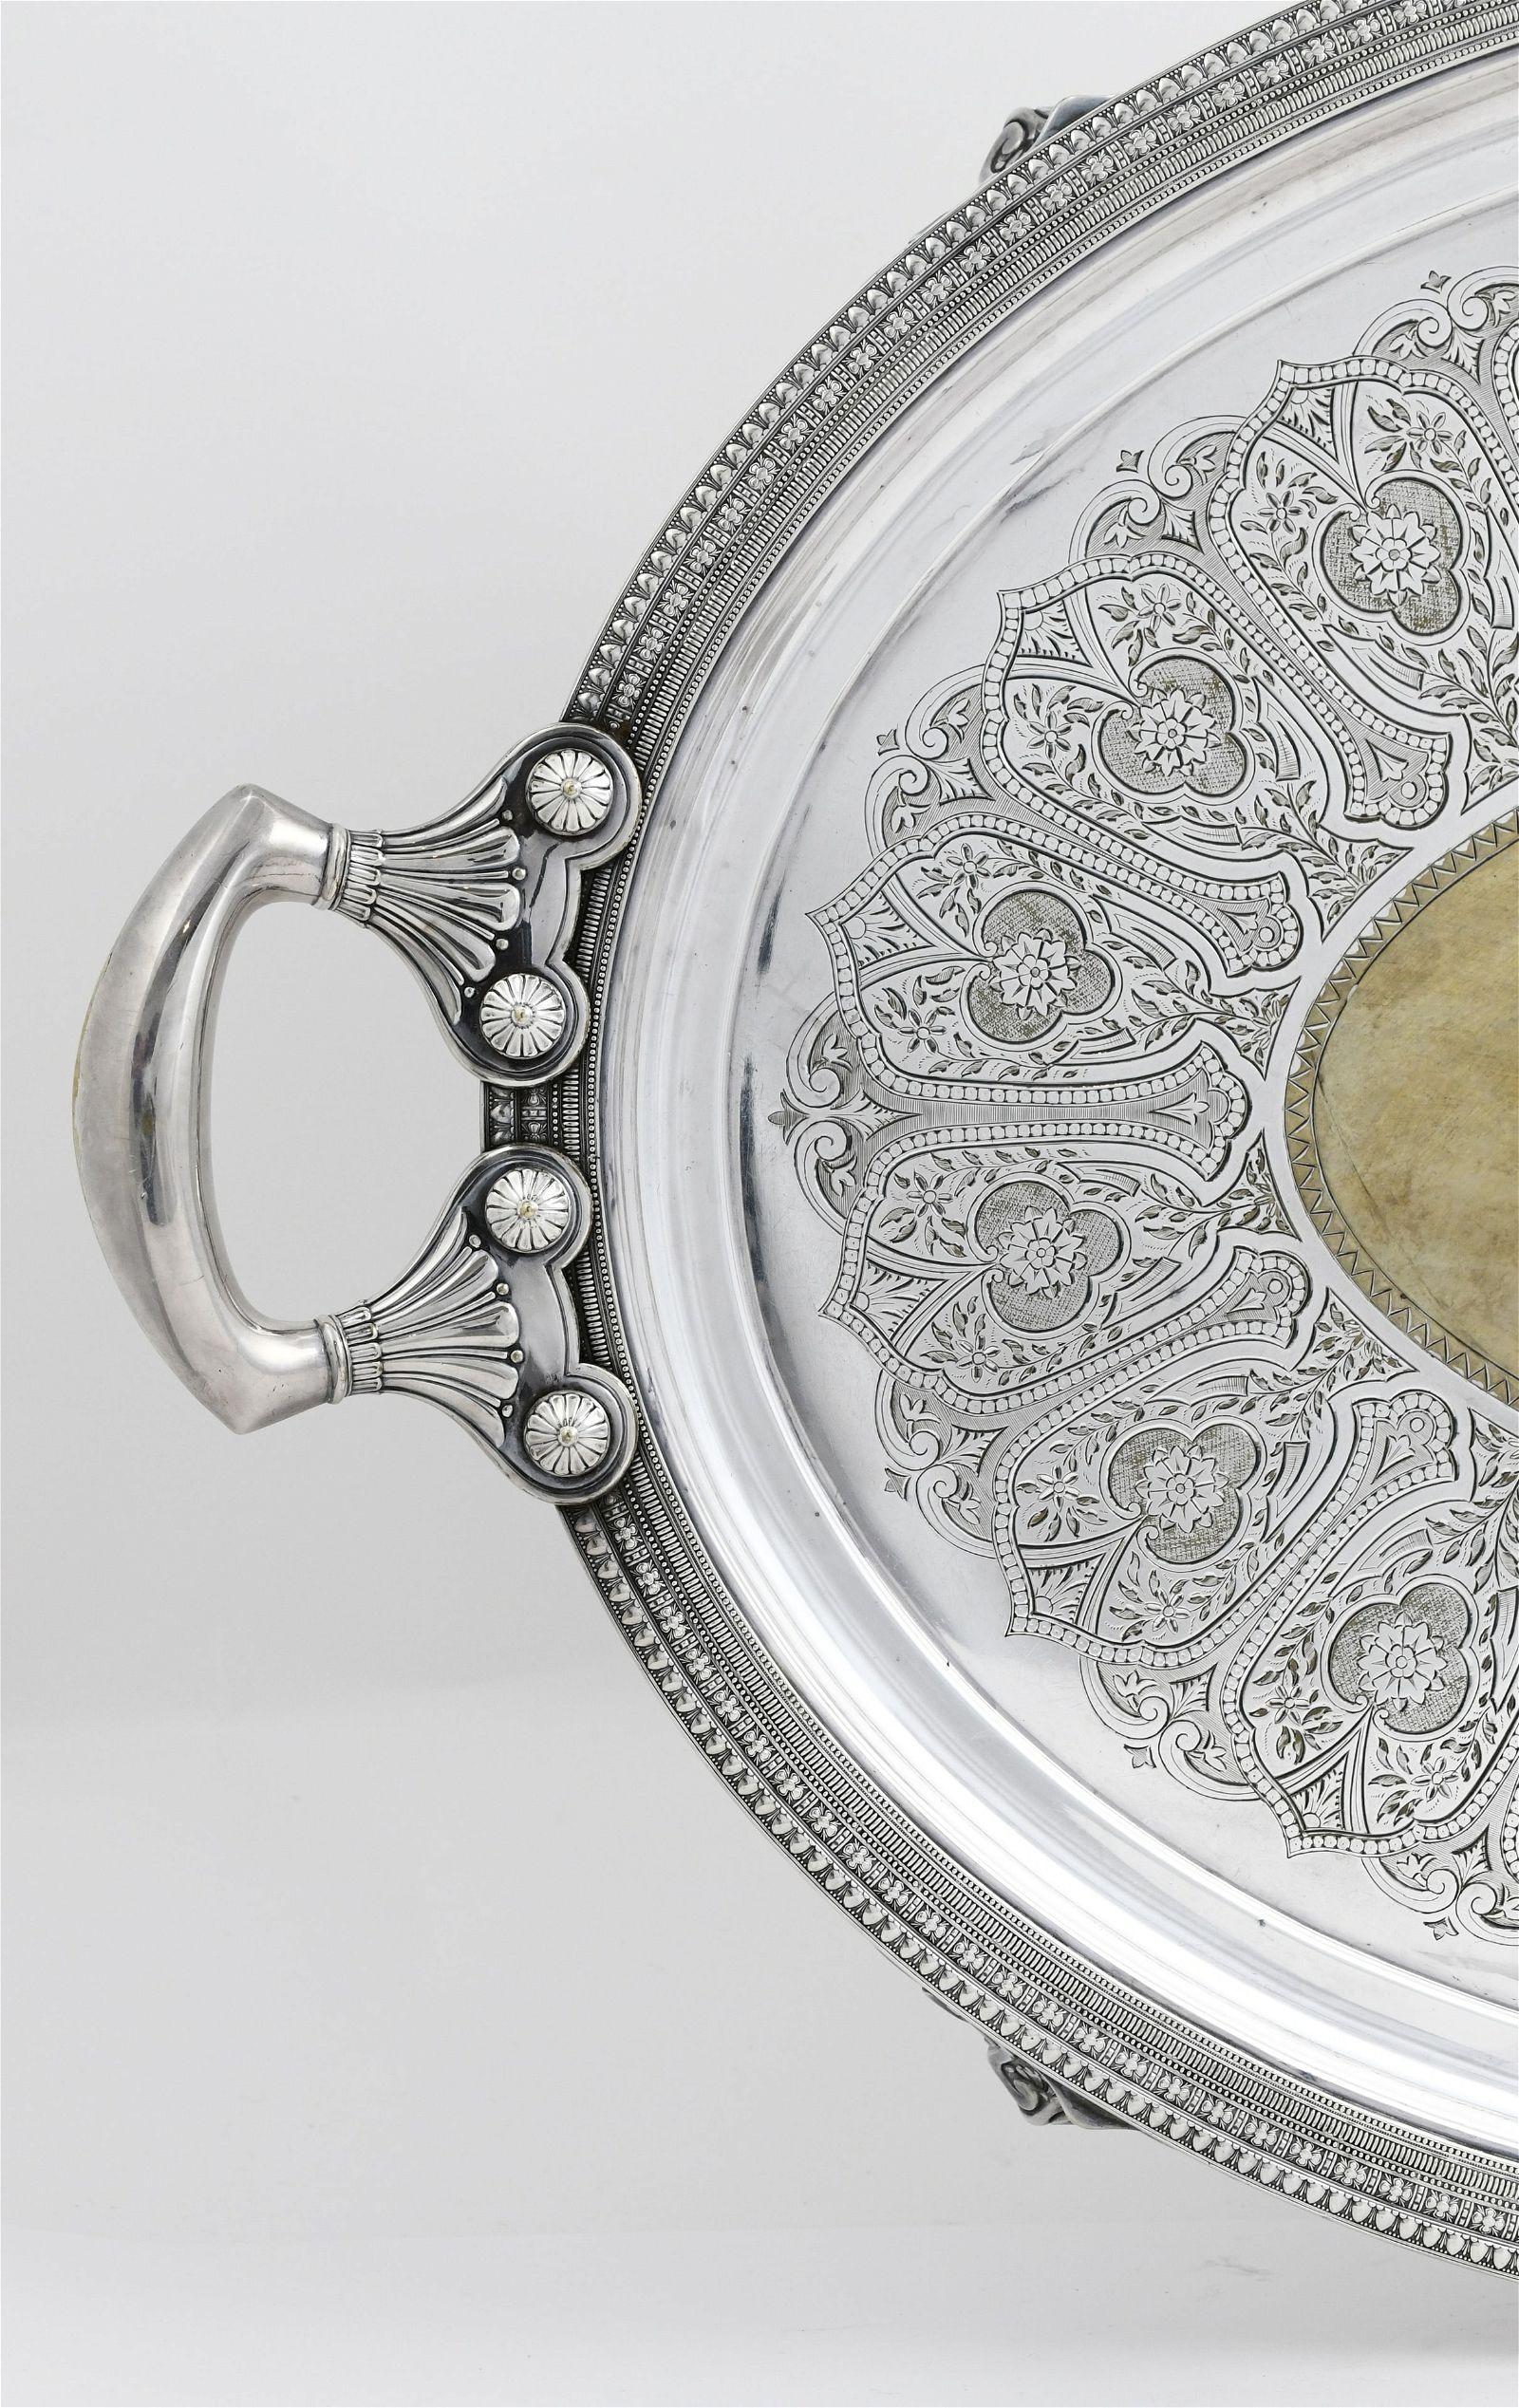 Edwardian Exceptional Silverplate Salver Serving Tray by Tiffany and Co.